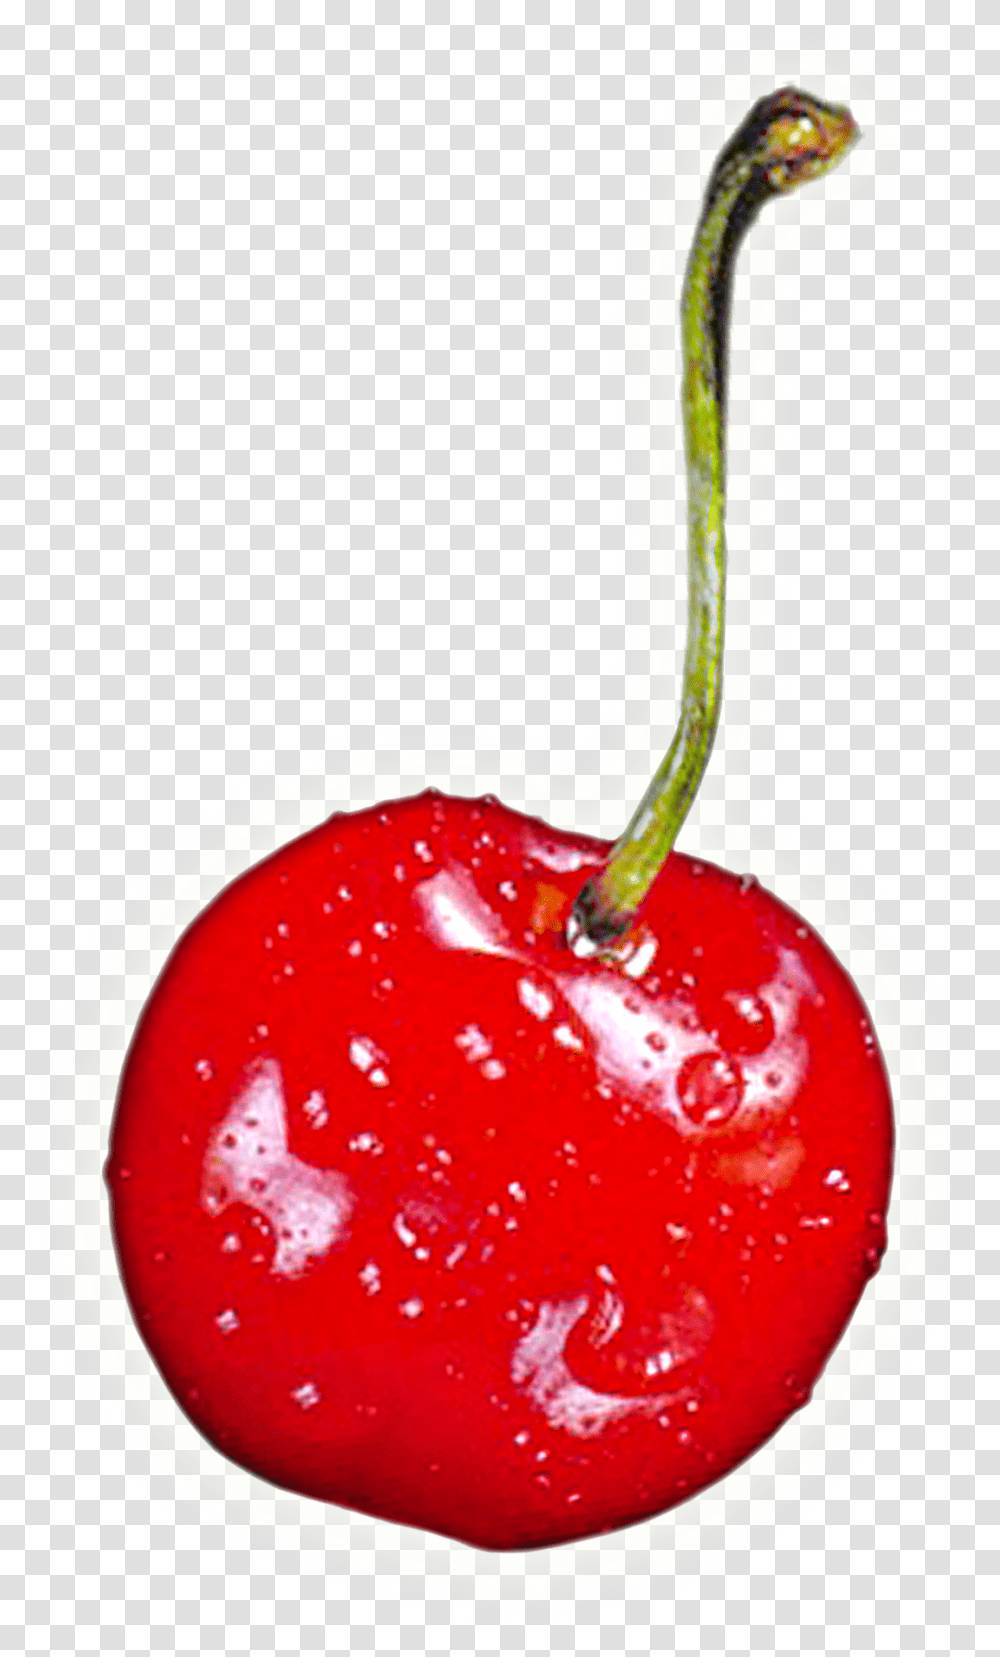 Cherry Free Background Cherries, Plant, Fruit, Food, Ketchup Transparent Png